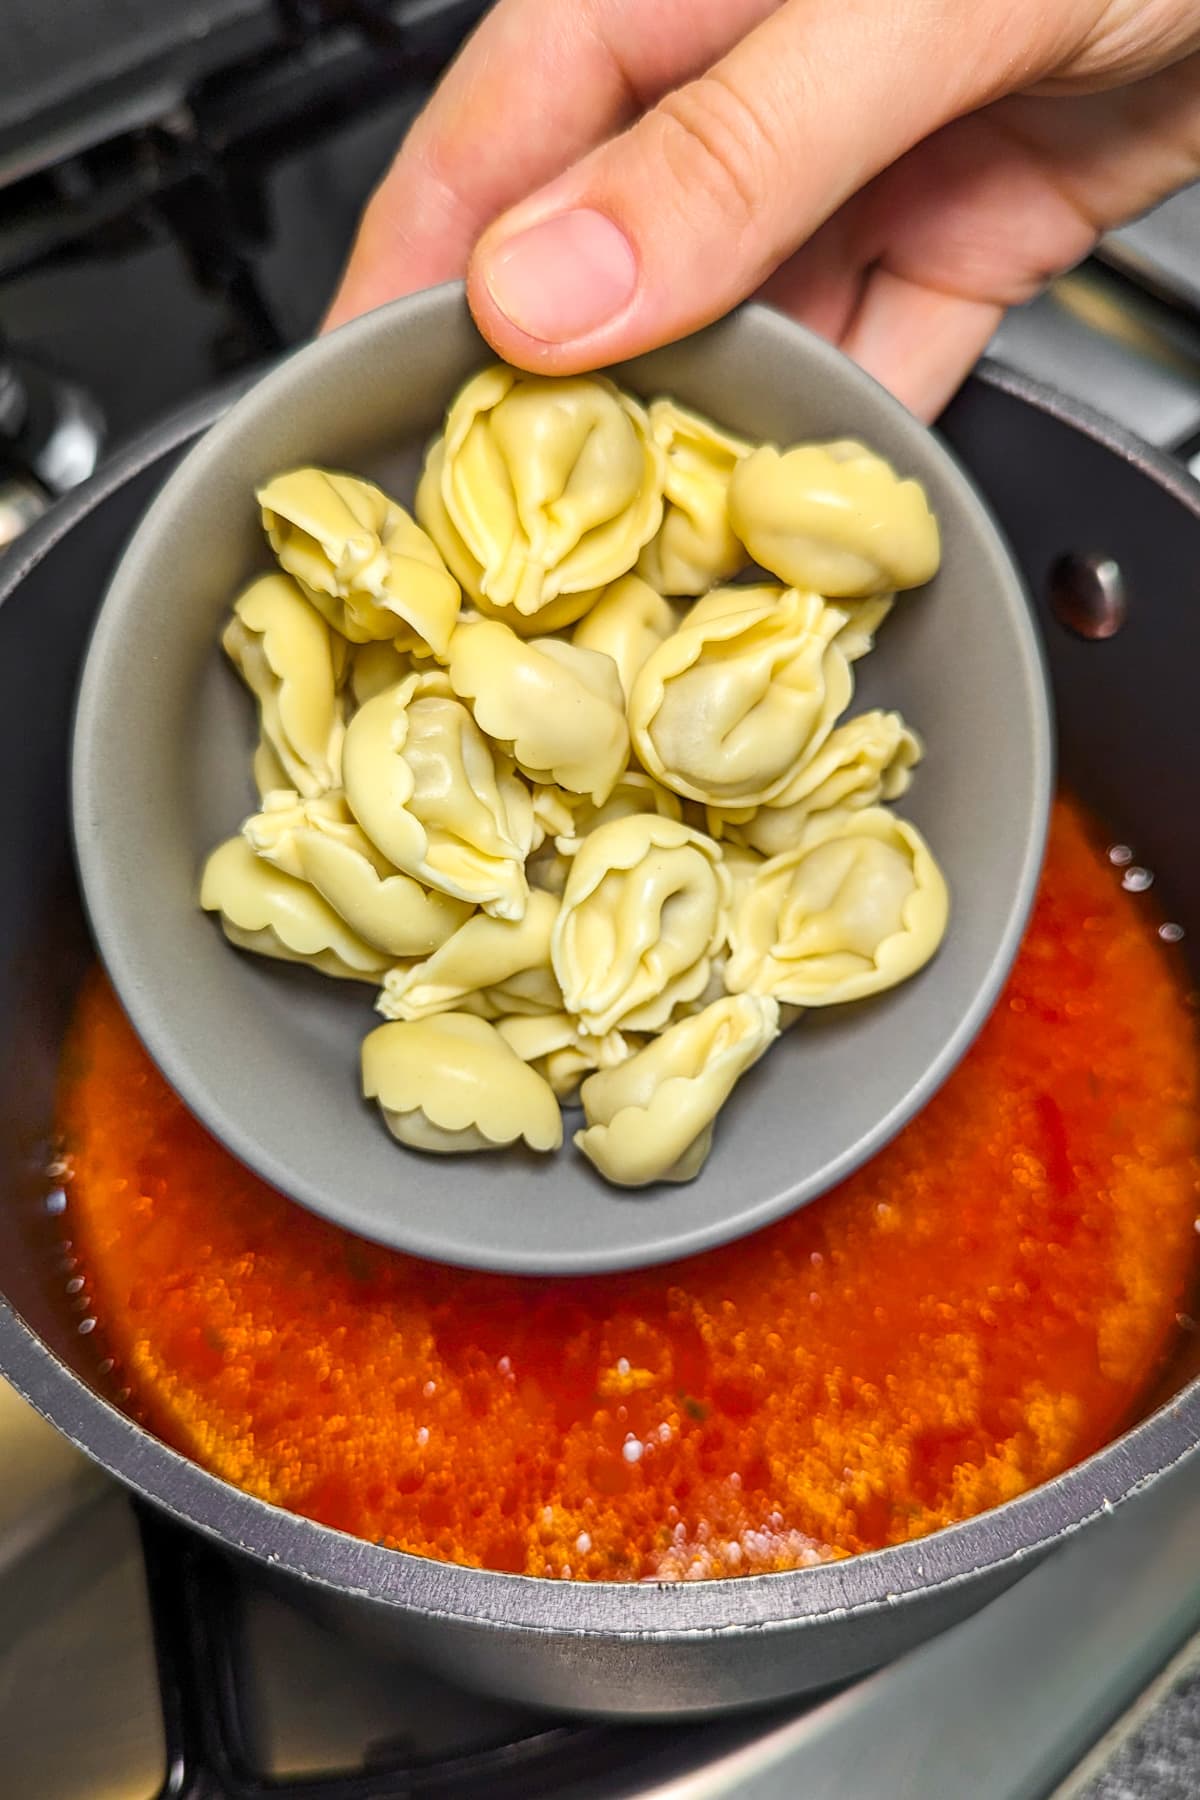 A woman hand holding a bowl with tortellini over a tomato soup in a pan on the stove.